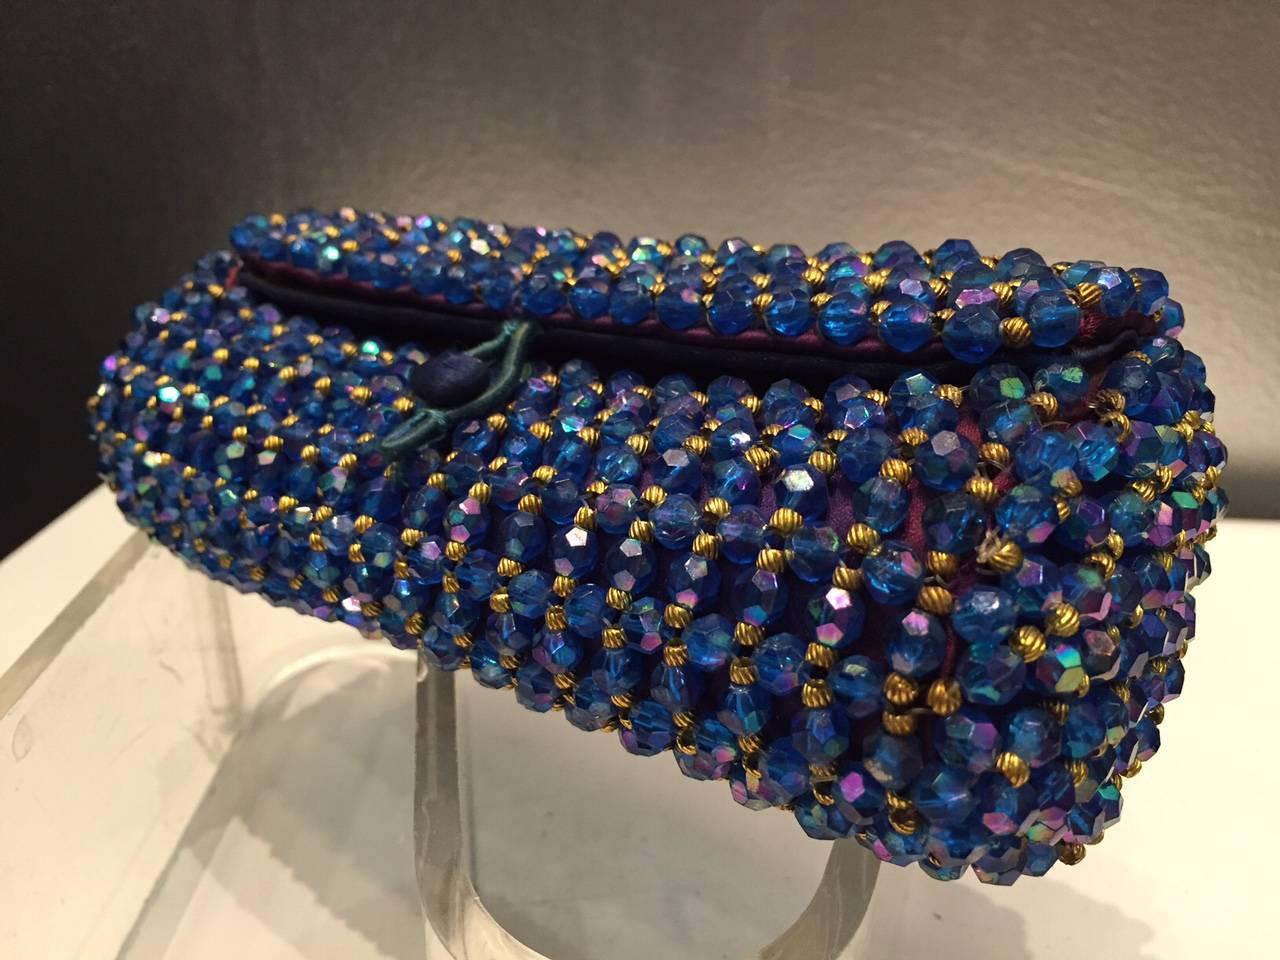 A gorgeous 1950s Koret sapphire blue and gold beaded barrel clutch with silk satin lining. Loop and button closure. Beading is acrylic with brass spacer beads. 